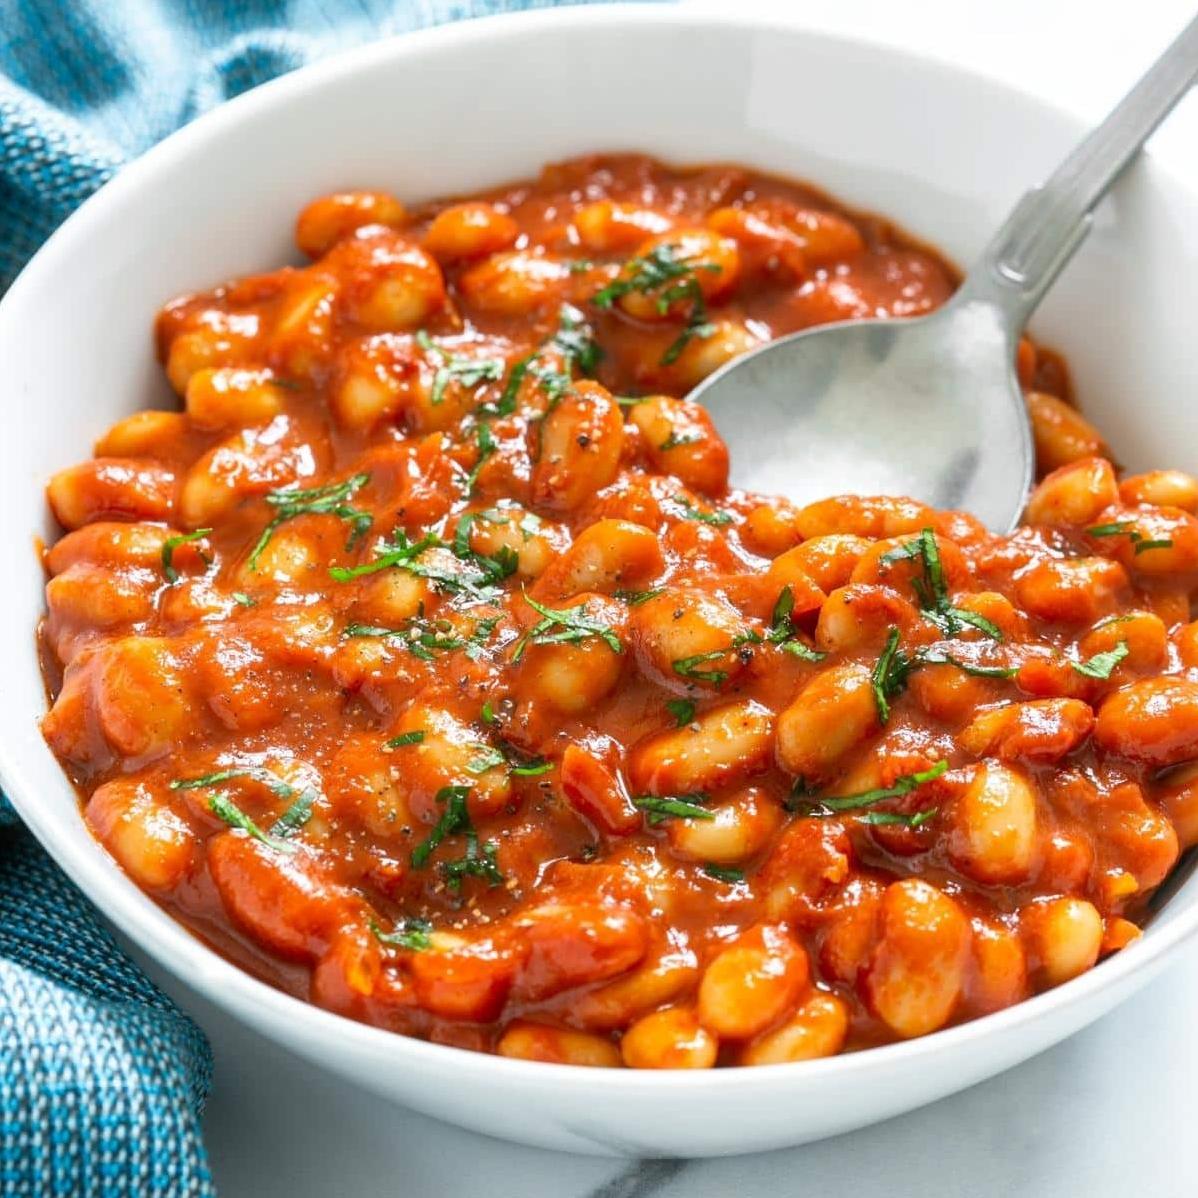 Delicious British Baked Bean Recipe You’ll Love